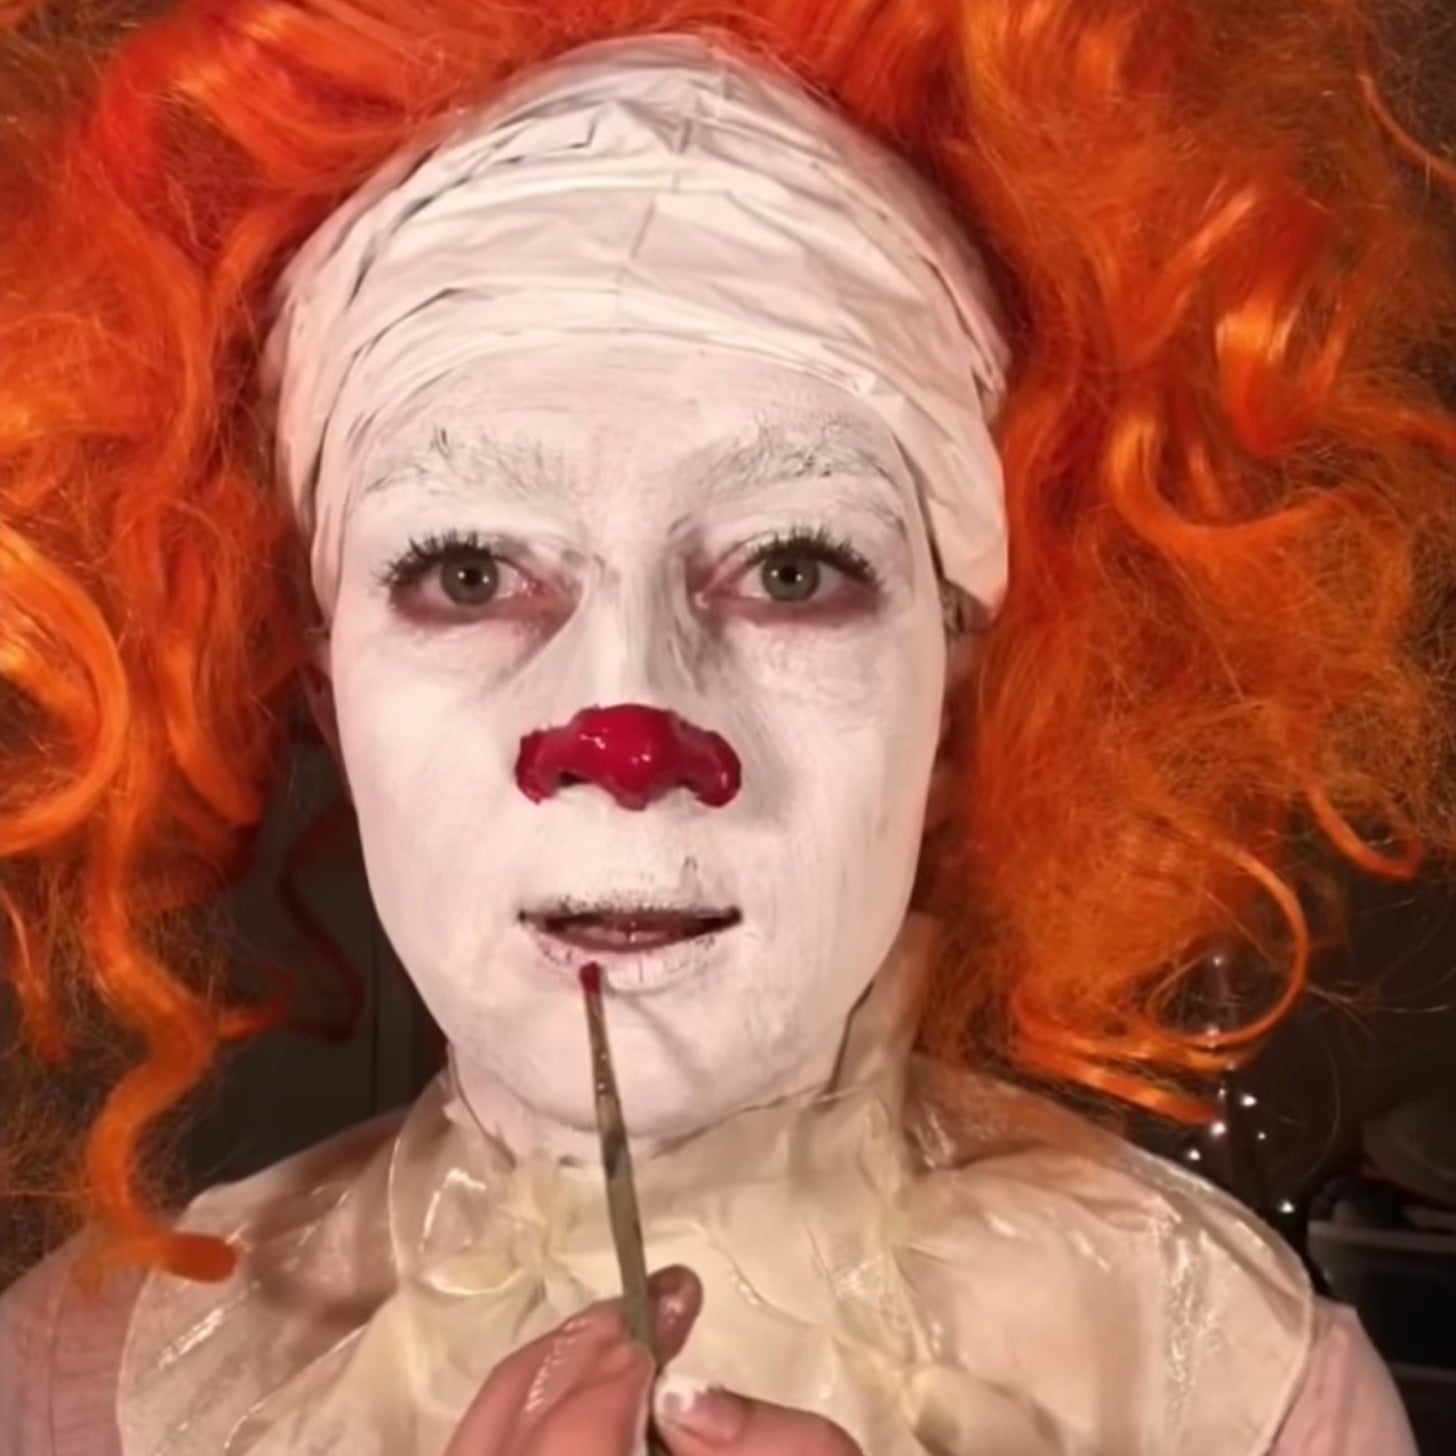 Funny Pennywise Makeup Tutorial Video | POPSUGAR Entertainment